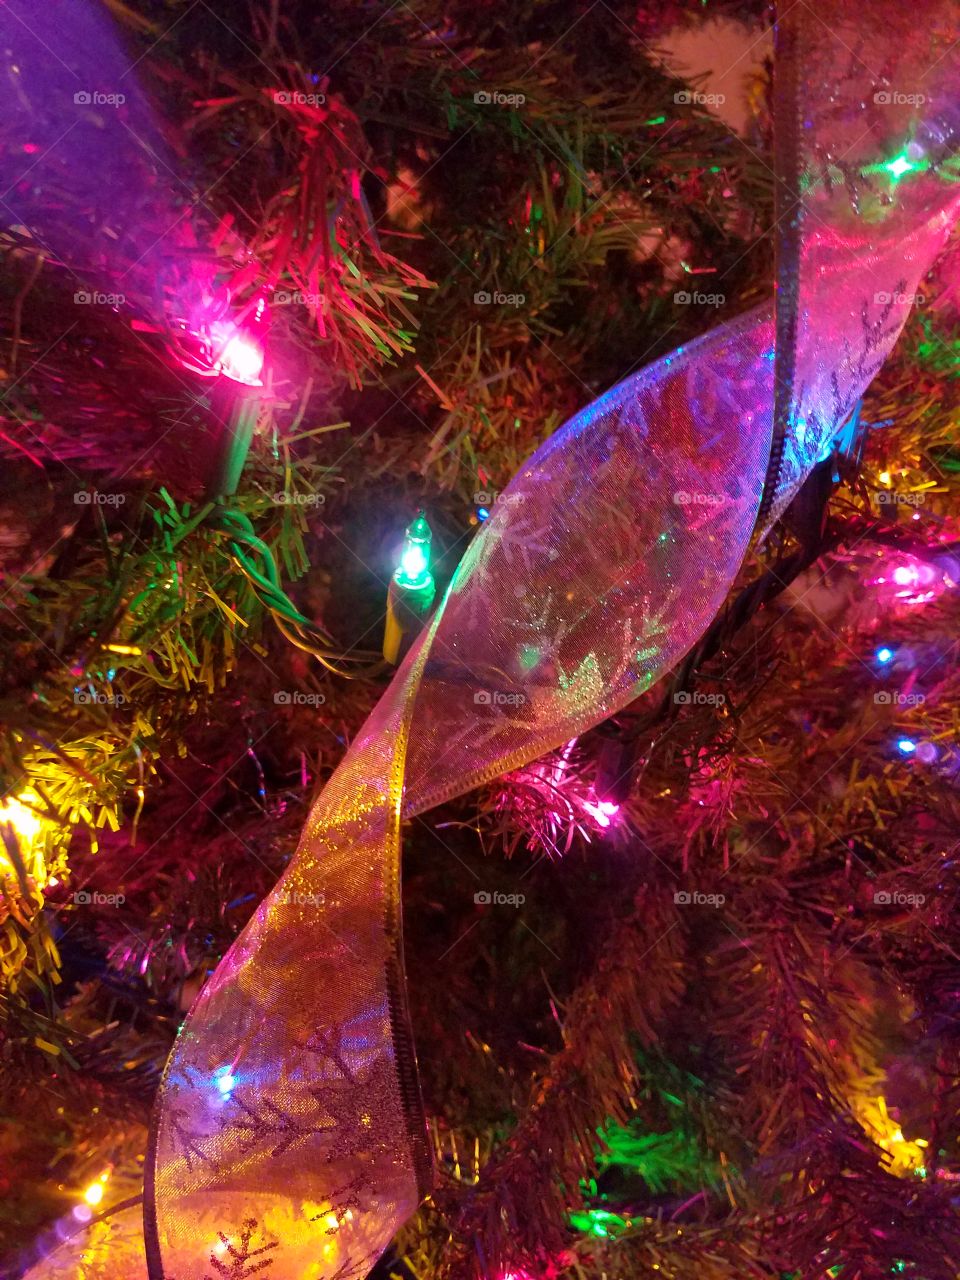 I really do love this snowflake ribbon as it captured the colorful lights so beautifully